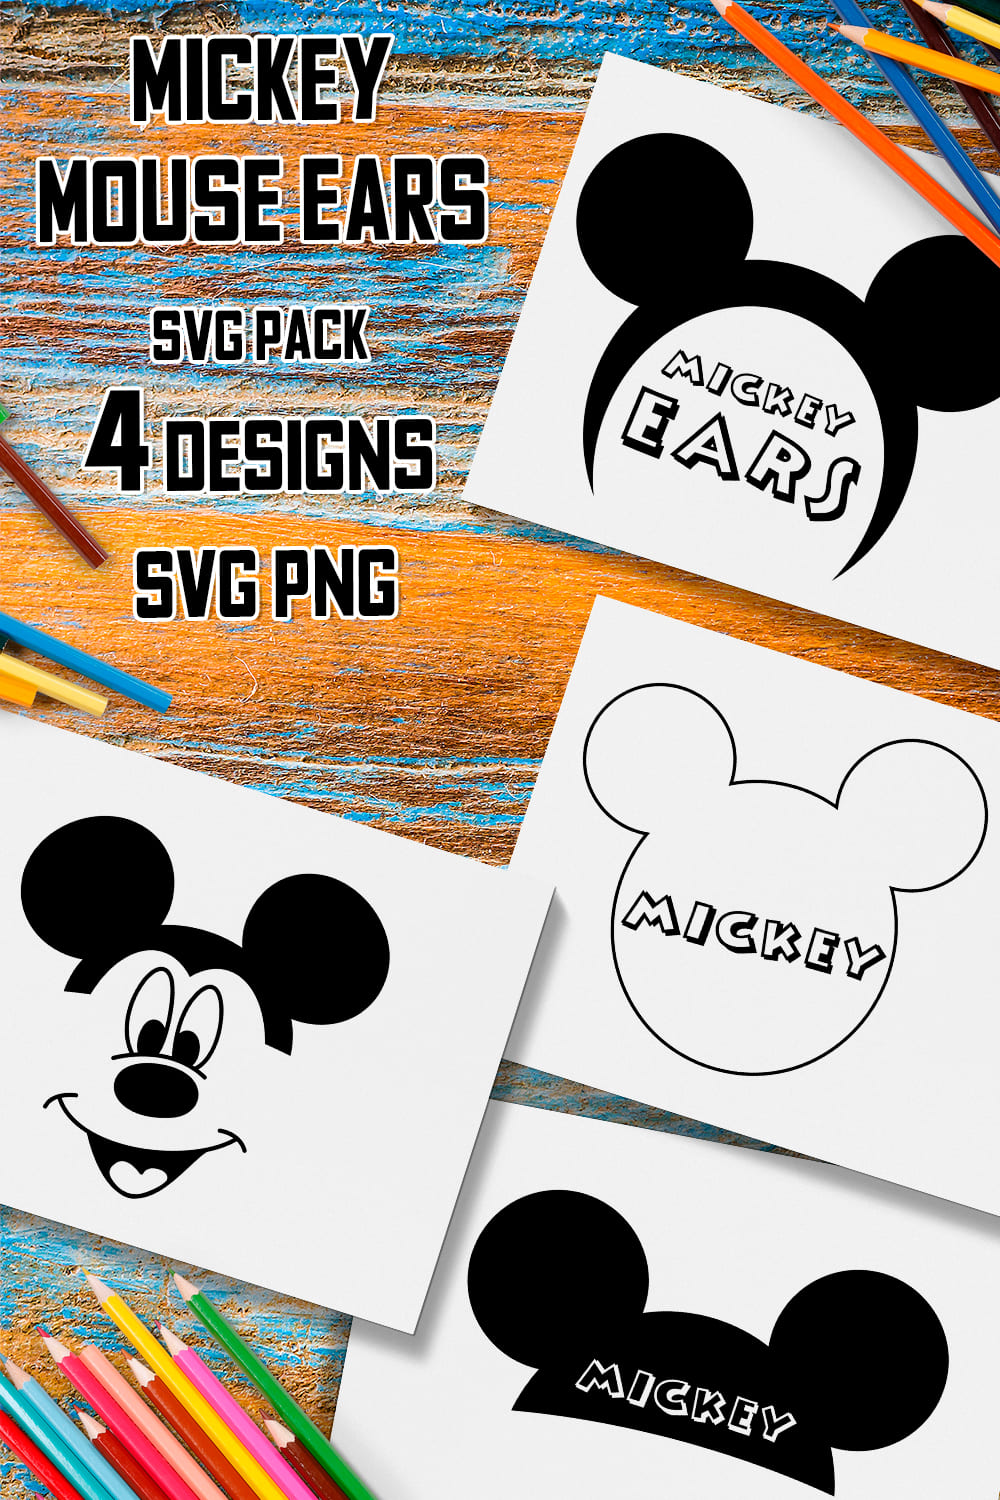 Mickey Mouse Ears SVG - pinterest image preview.